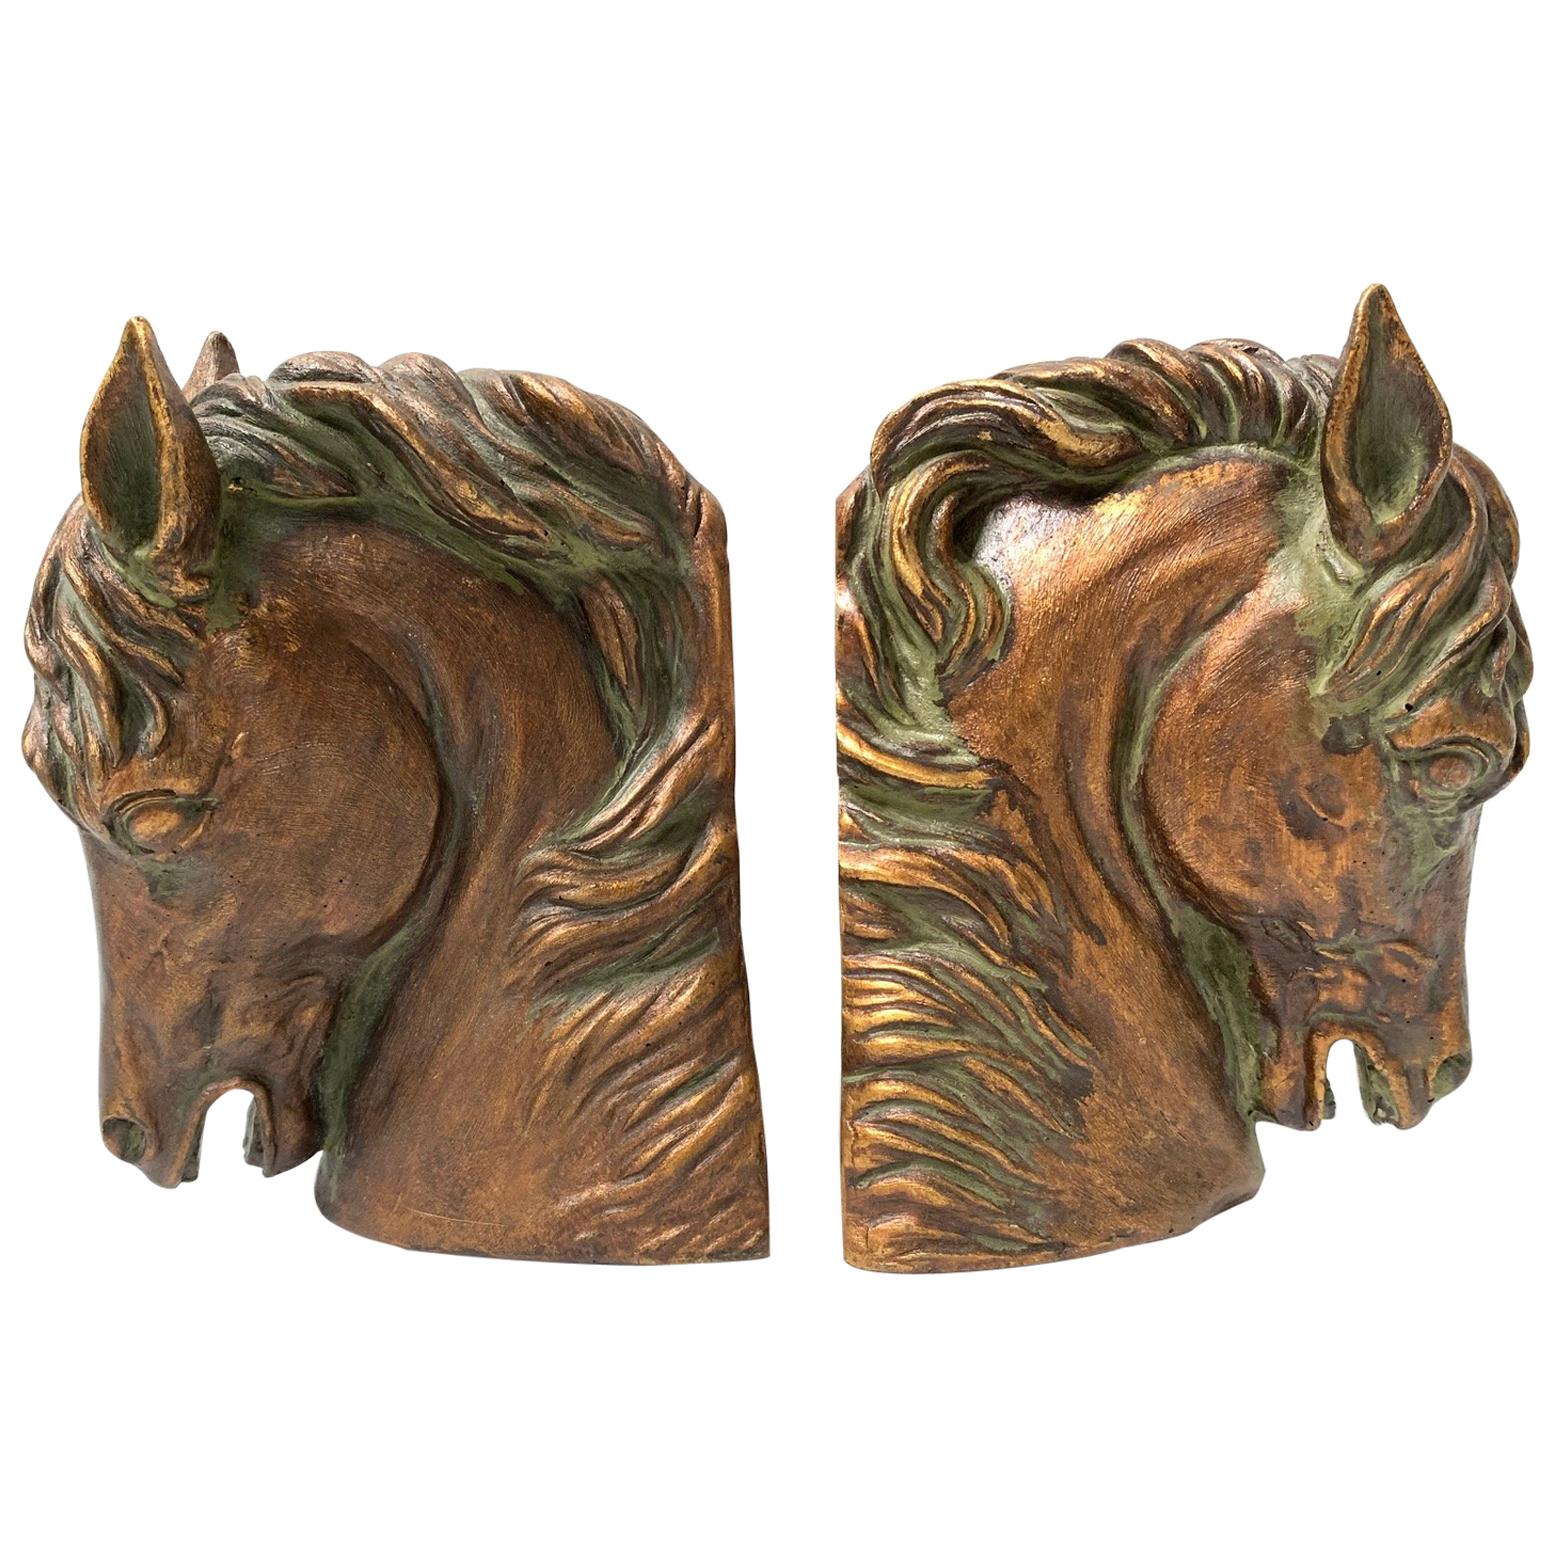 Pair of Sculptural Horse Head Bookends